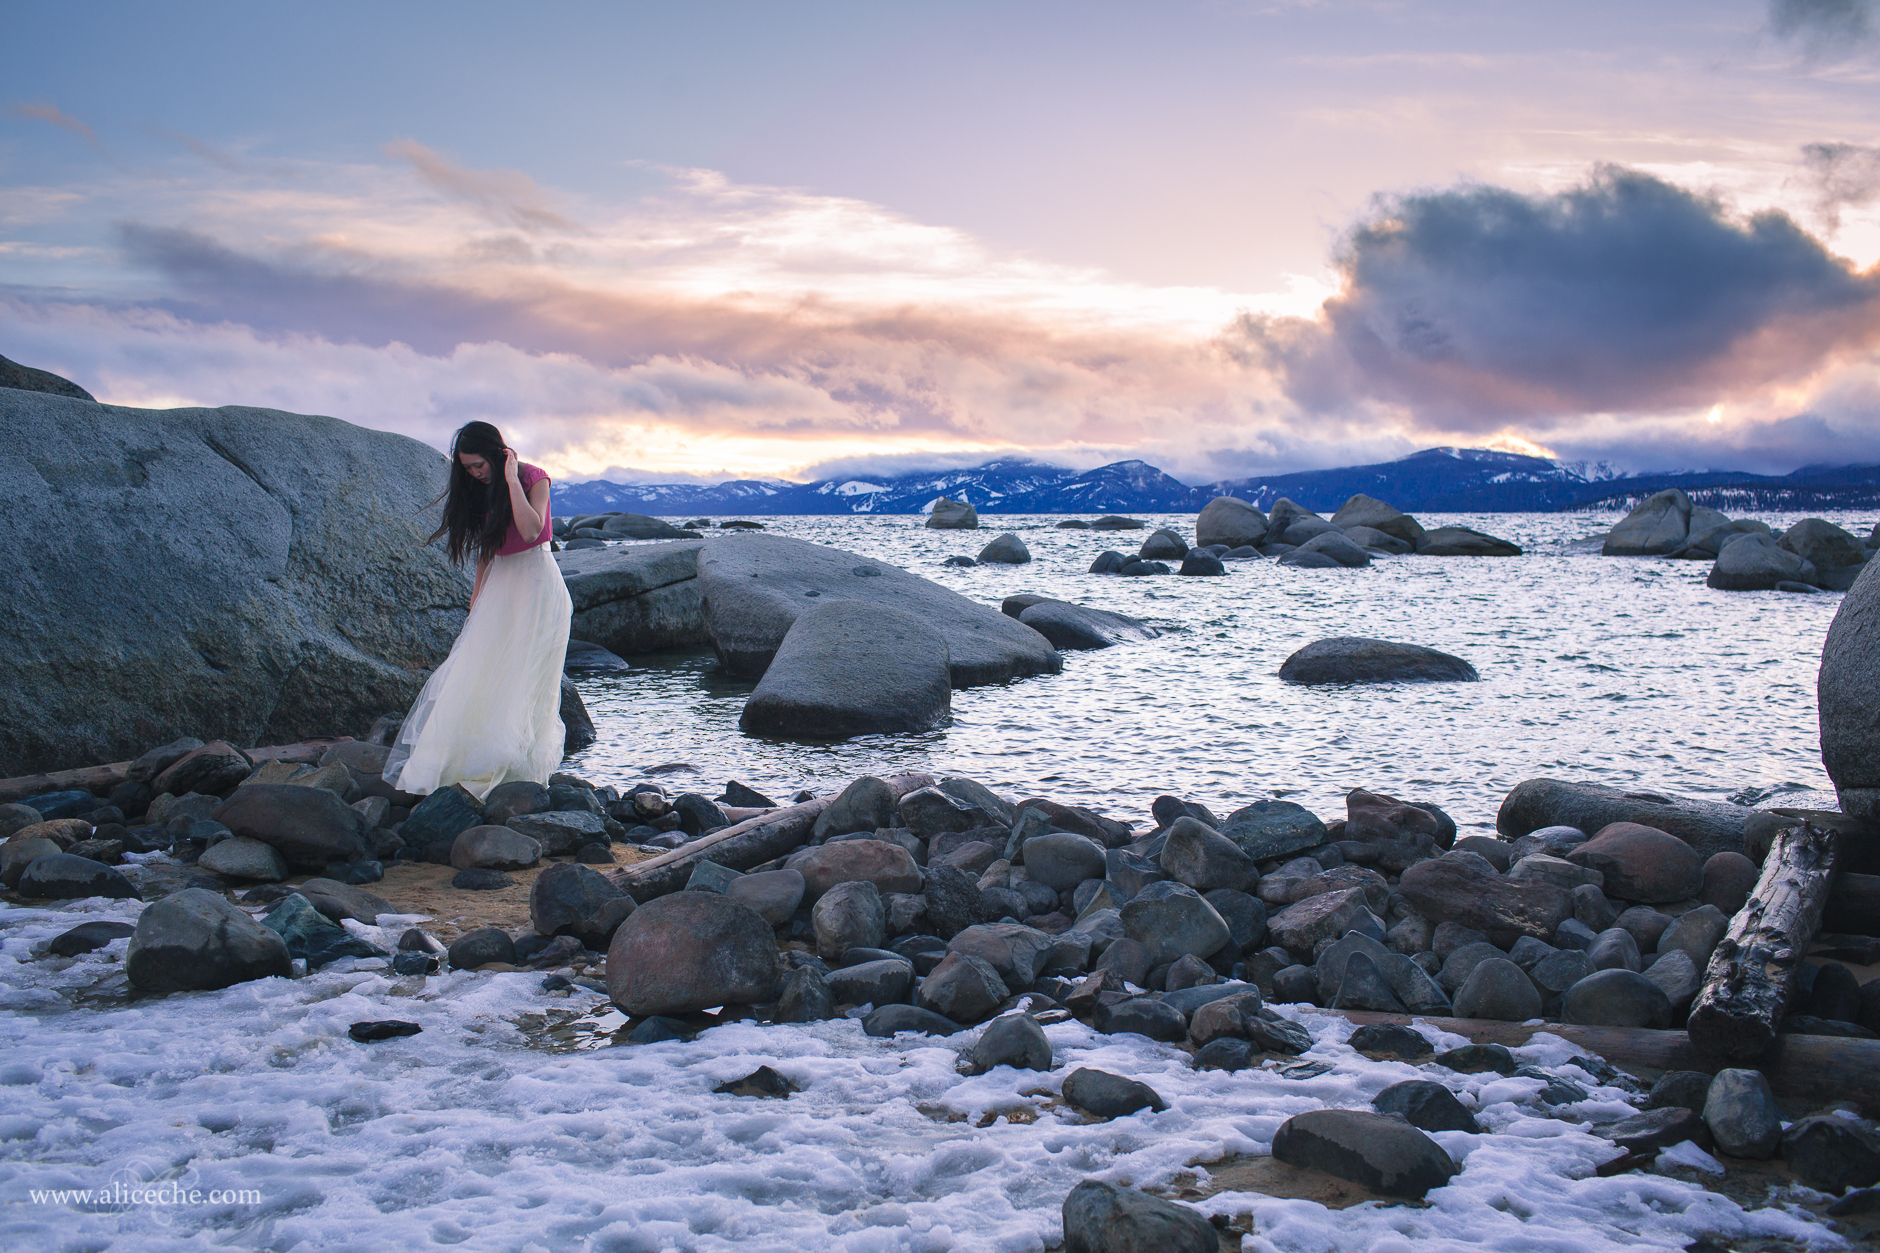 alice-che-photography-lake-tahoe-self-portrait-sunset-movement-tulle-skirt-snow